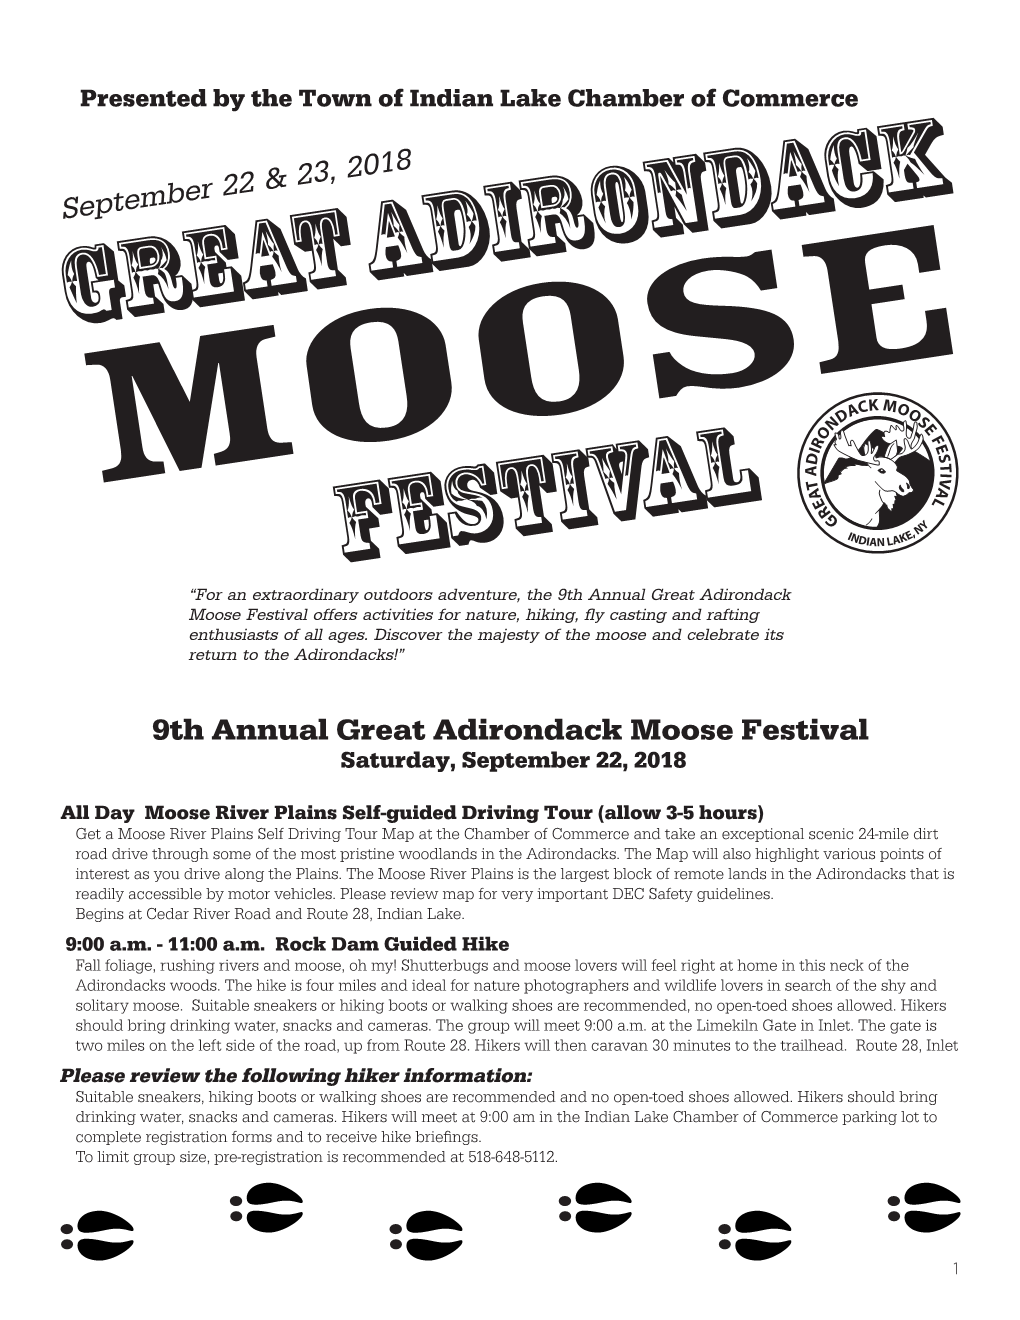 Moose Festival Offers Activities for Nature, Hiking, Fly Casting and Rafting Enthusiasts of All Ages